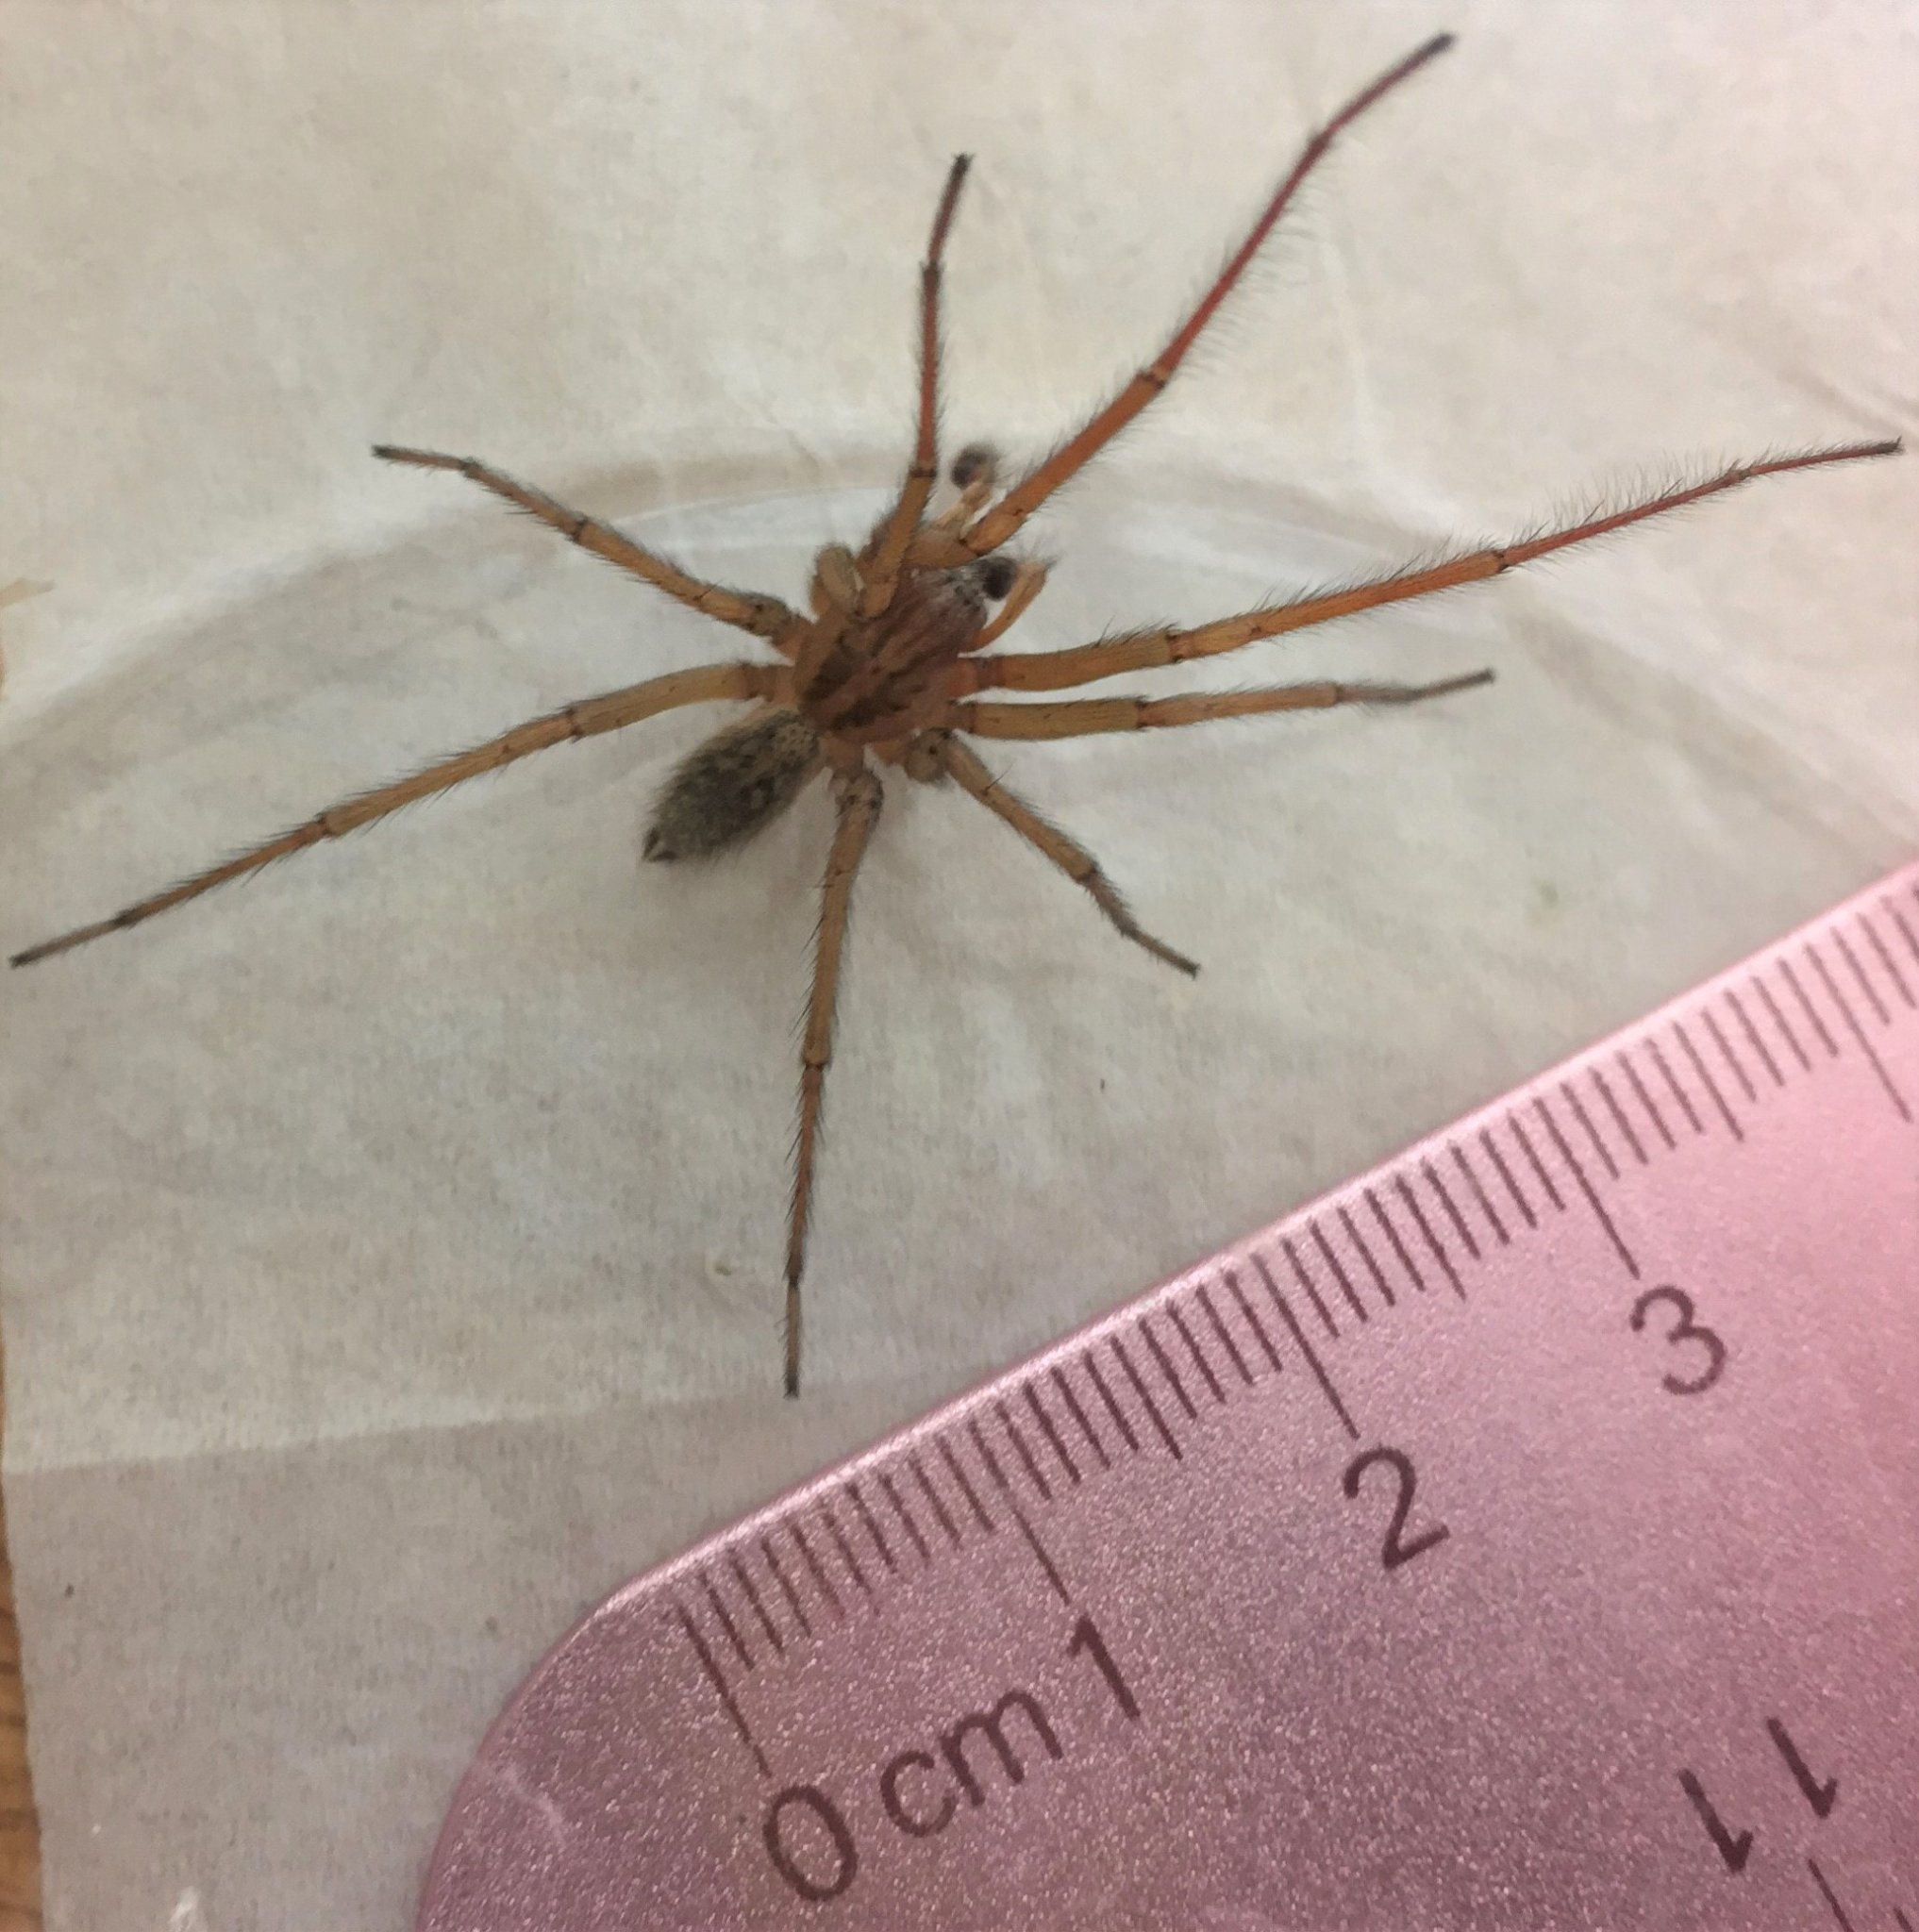 This photo shows a male hobo spider next to a ruler for scale.